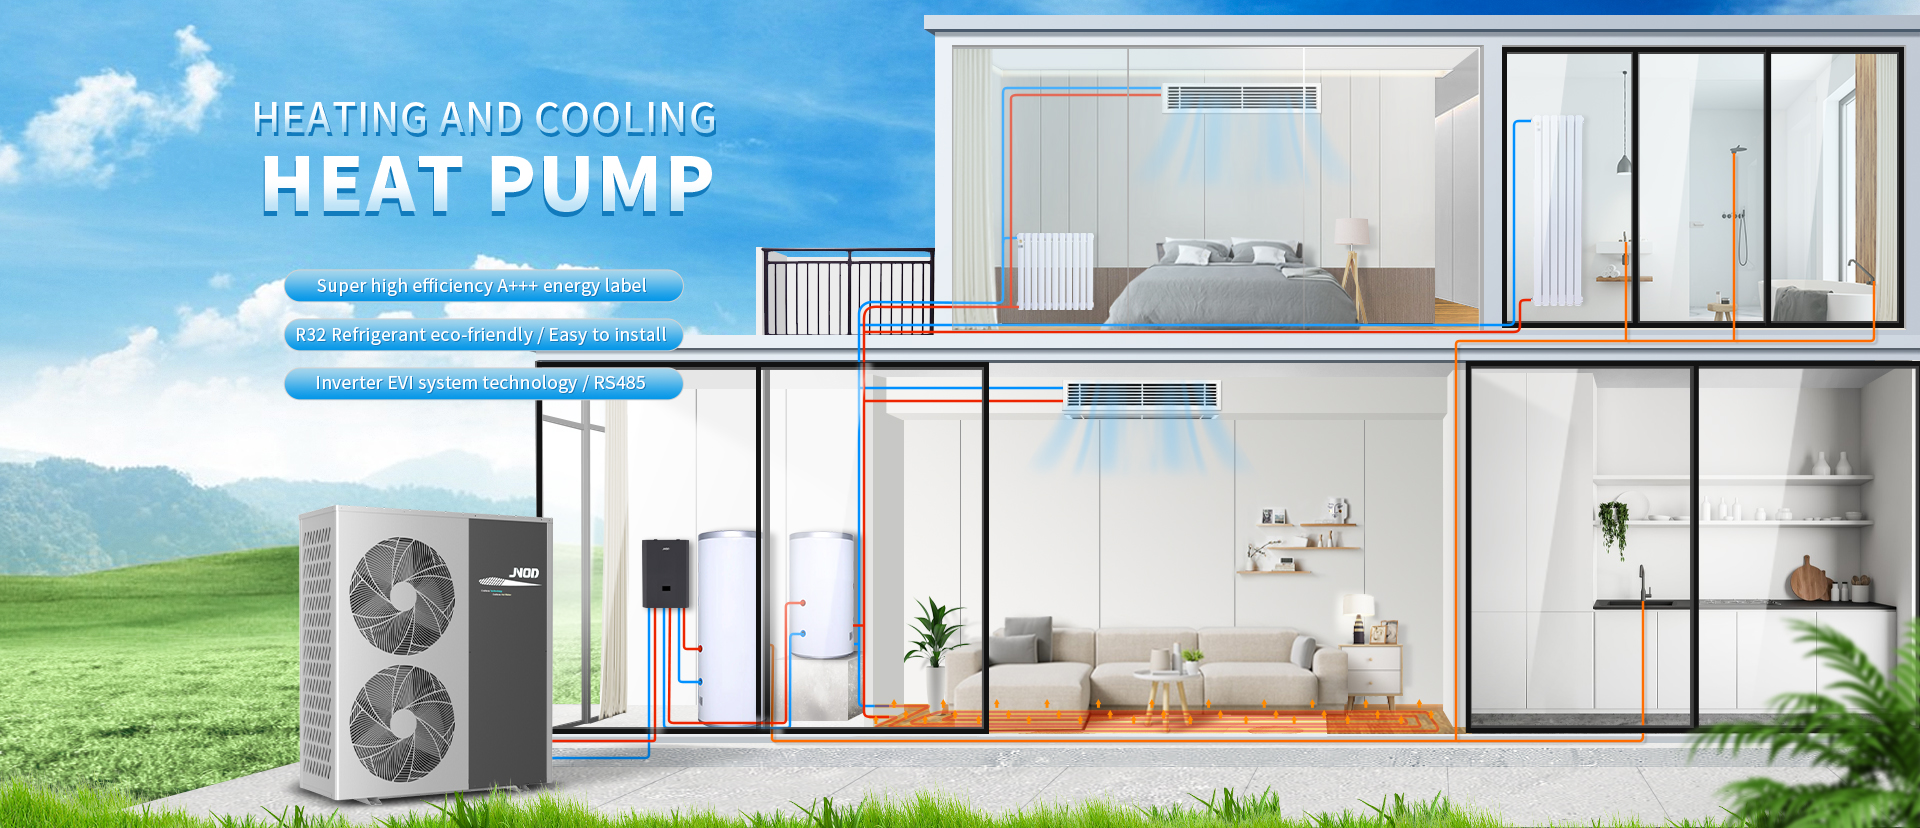 Central Heating And Cooling Heat Pump